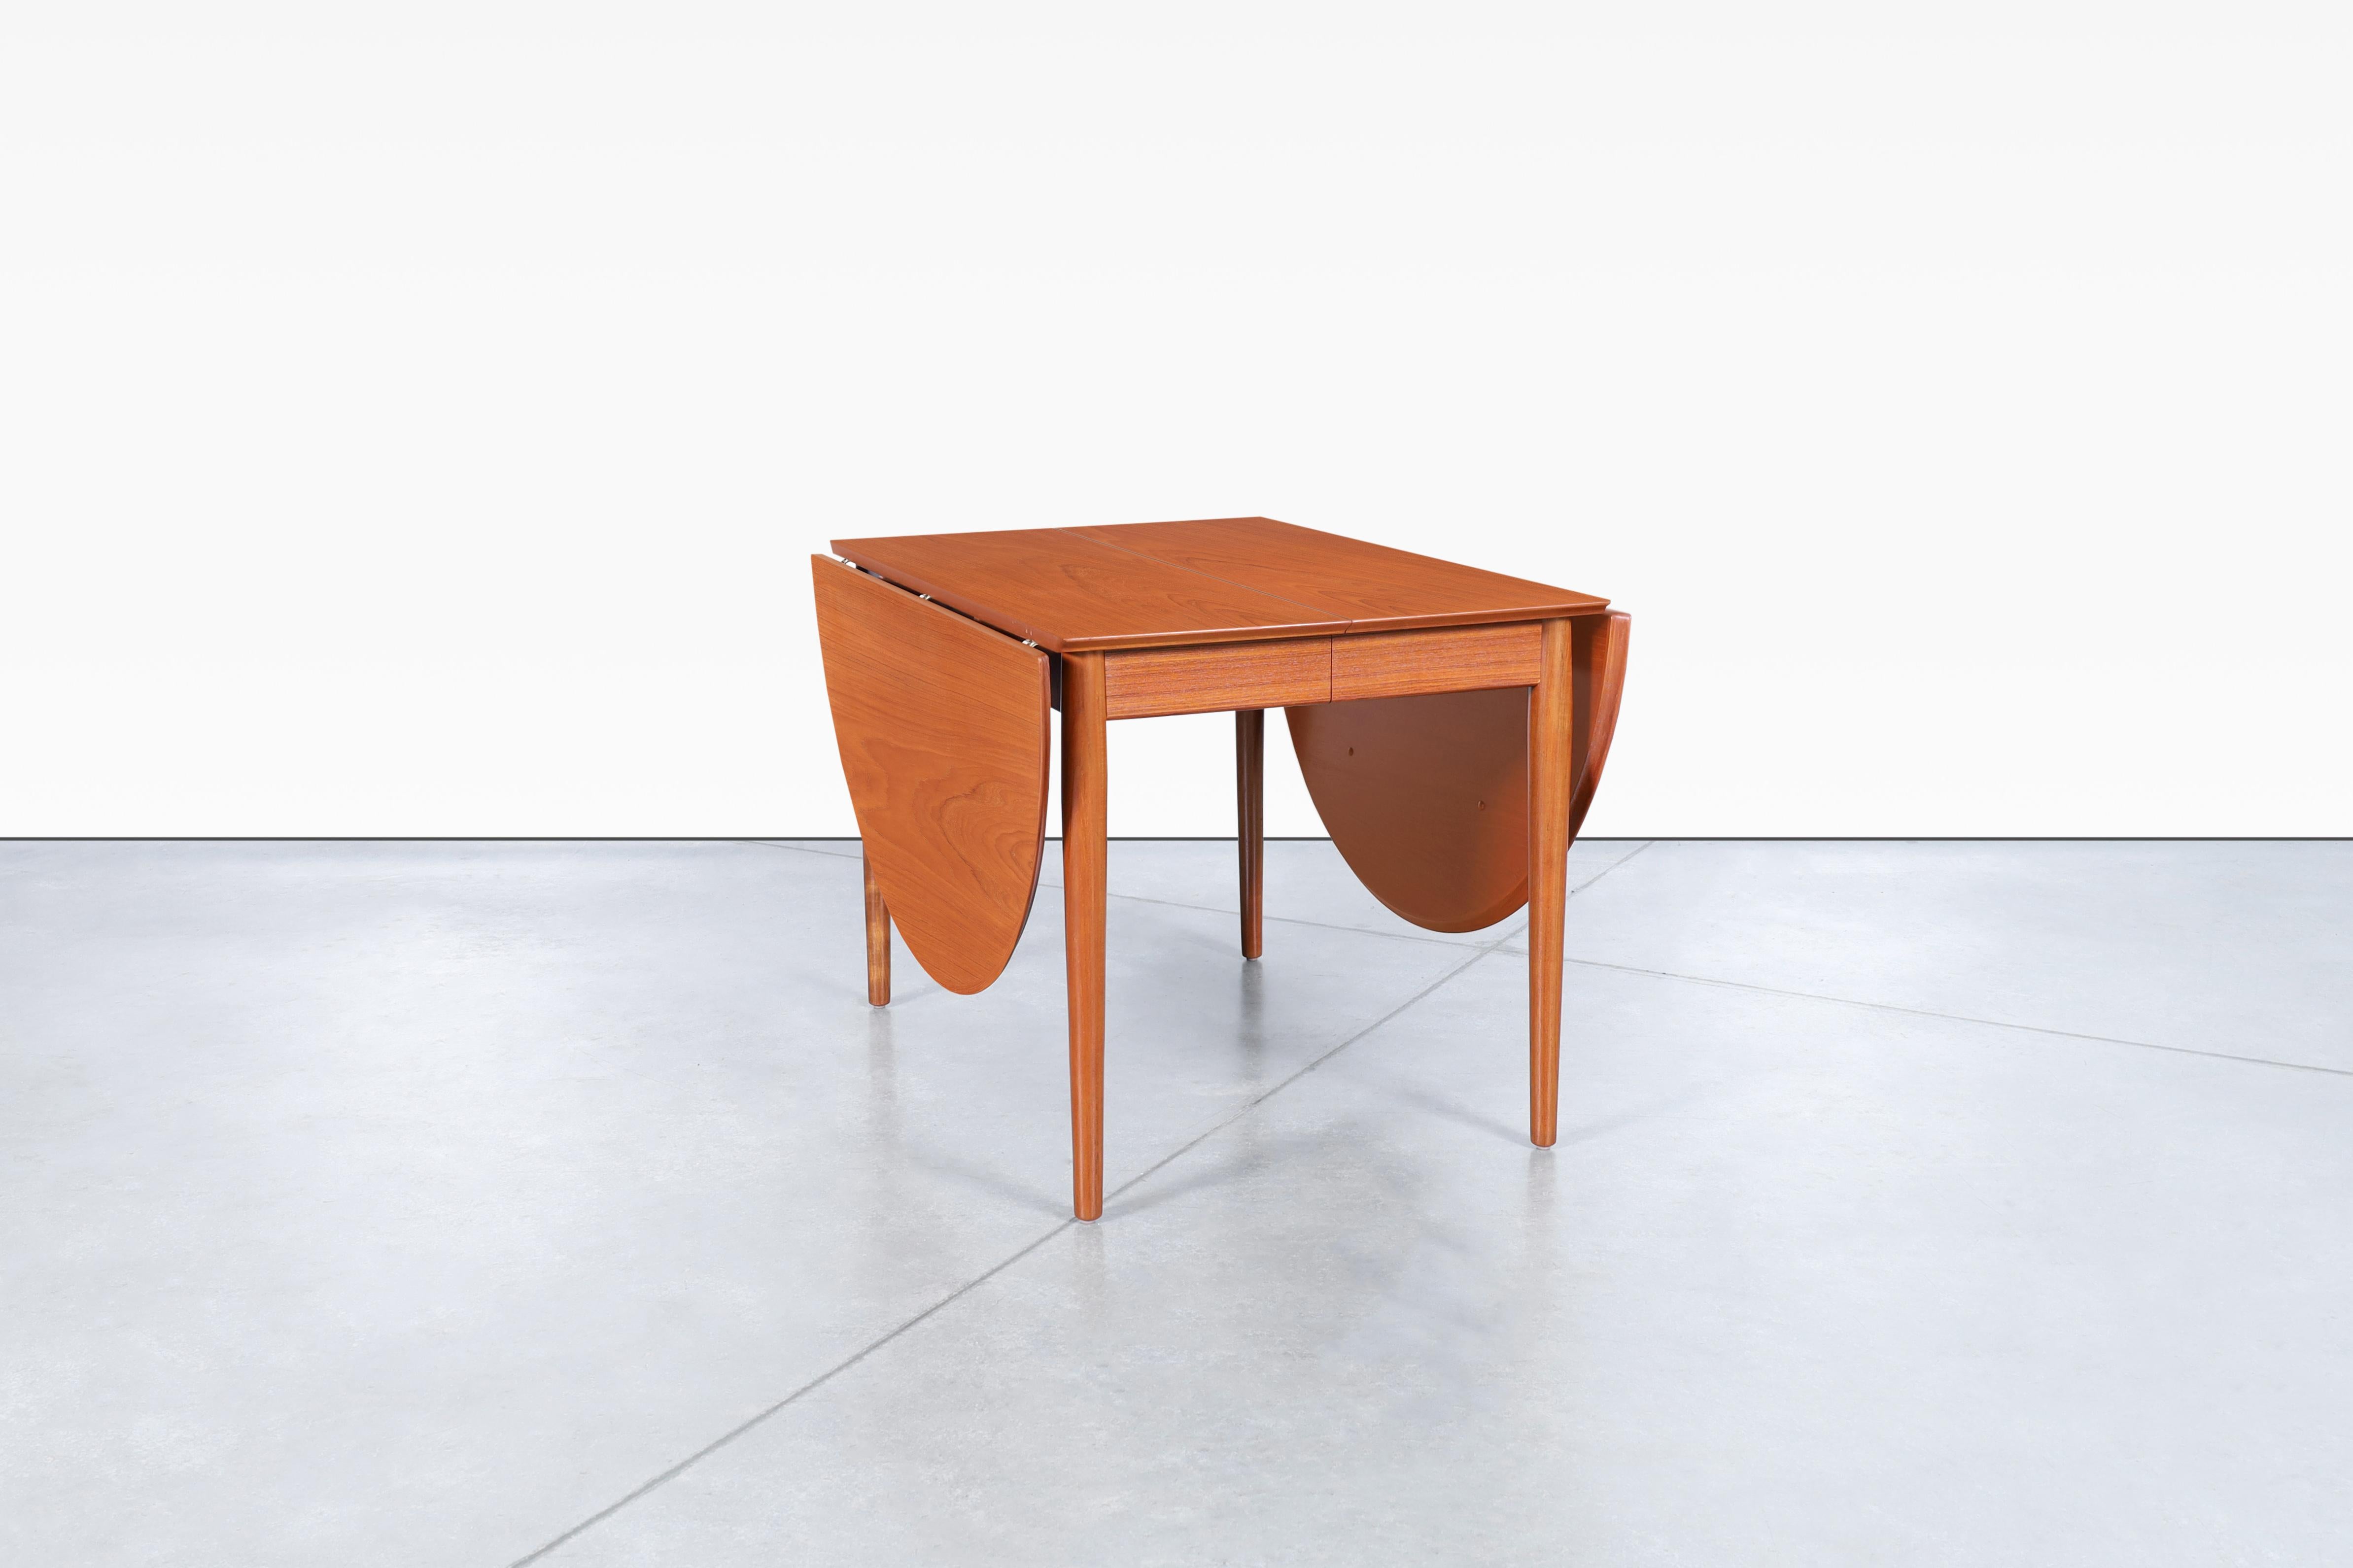 Looking for a statement piece to complement your dining room? Look no further than this stunning Danish modern teak expanding dining table designed by Arne Vodder for Sibast Møbler in Denmark, circa 1950s. The unique drop-leaf design is both stylish